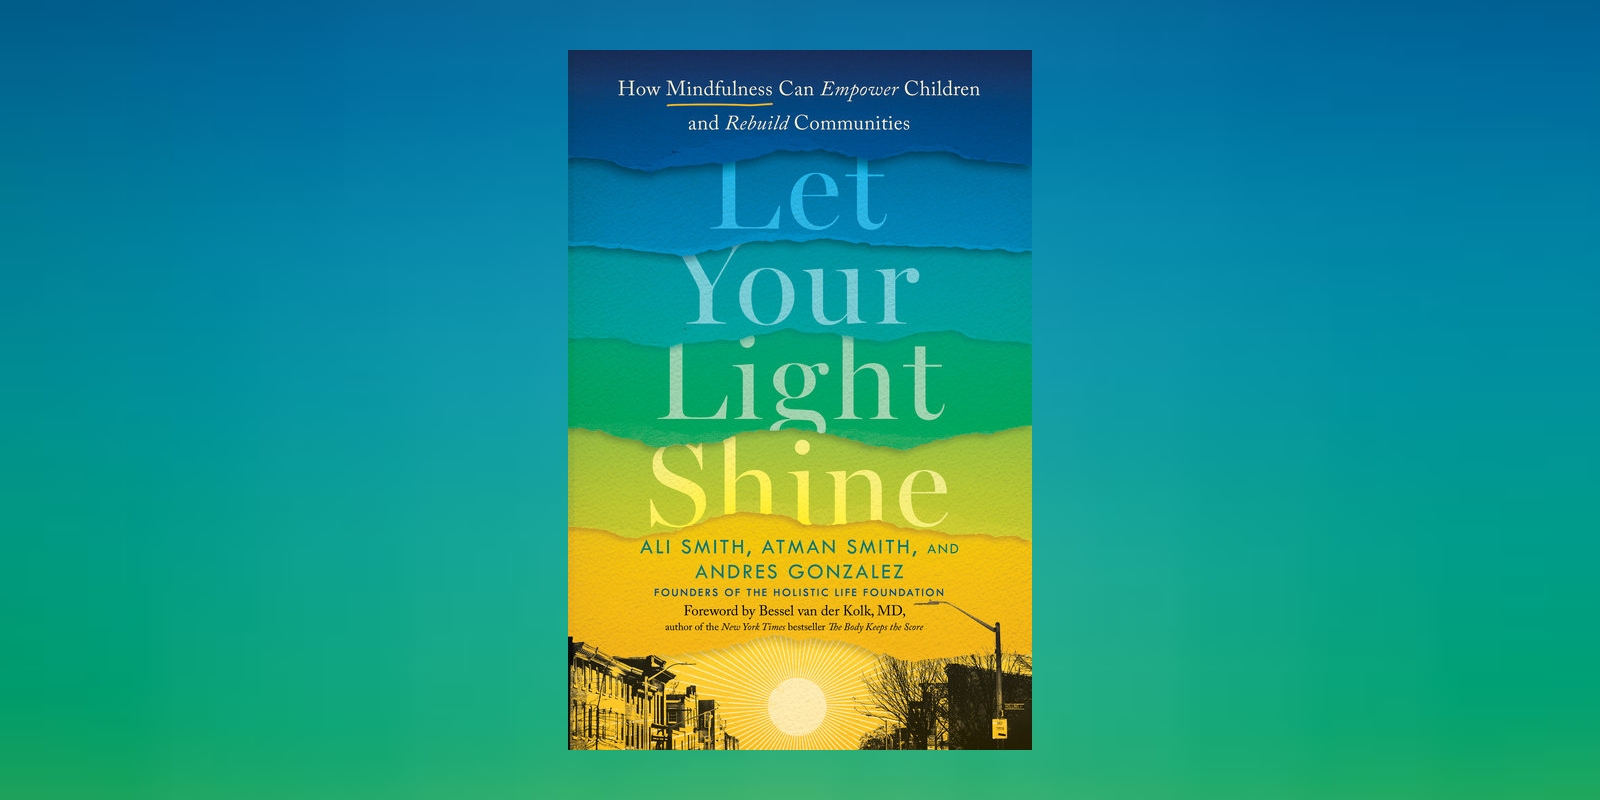 Excerpt from <i>Let Your Light Shine: How Mindfulness Can Empower Children and Rebuild Communities</i>